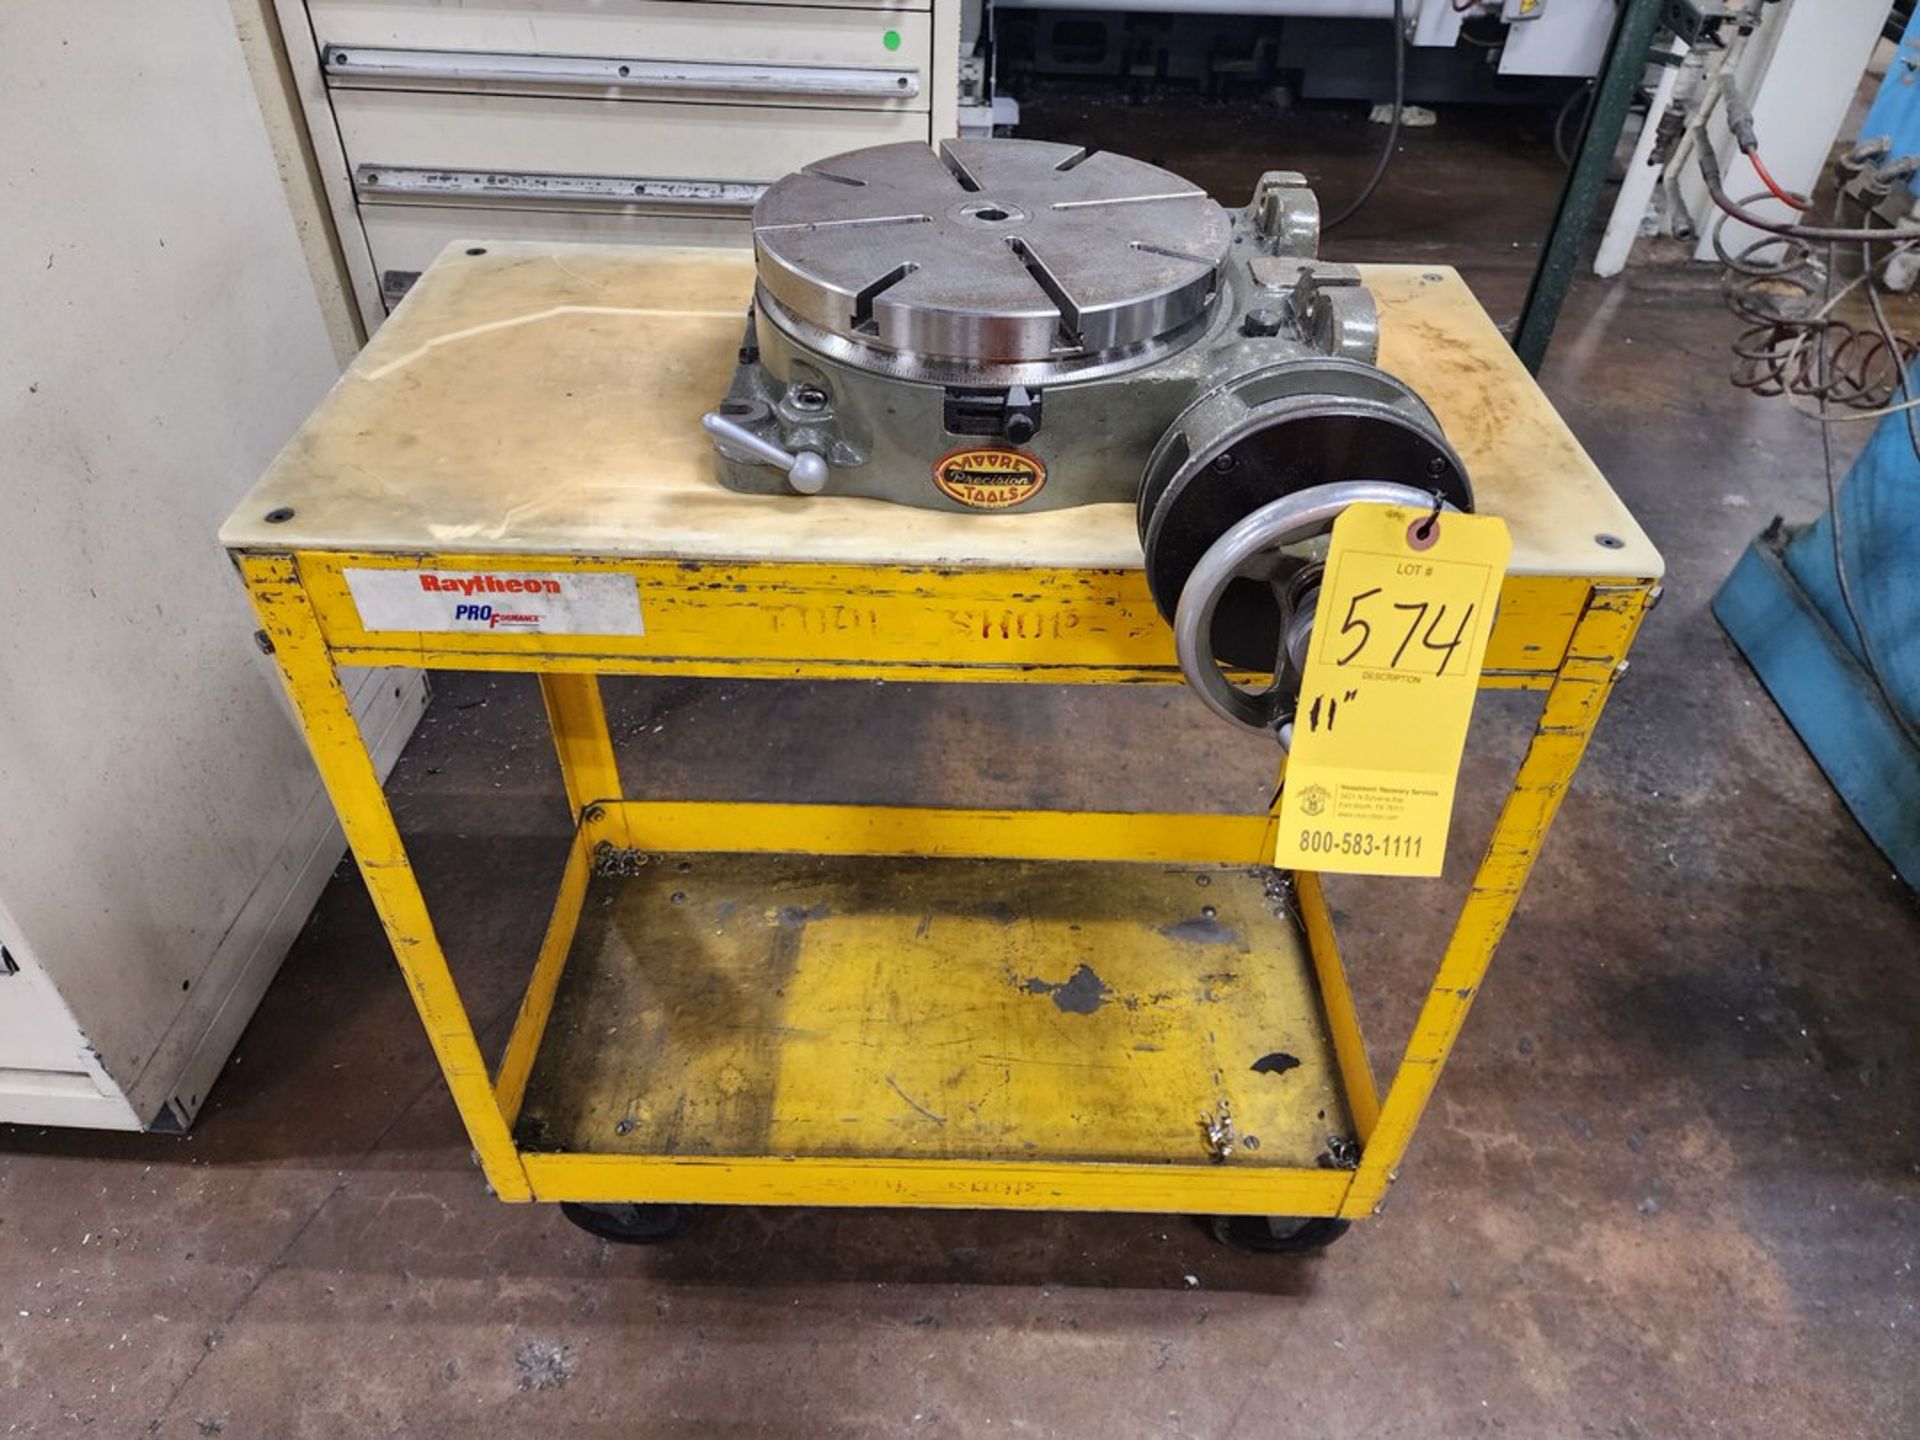 Moore Tools 11" Rotary Table